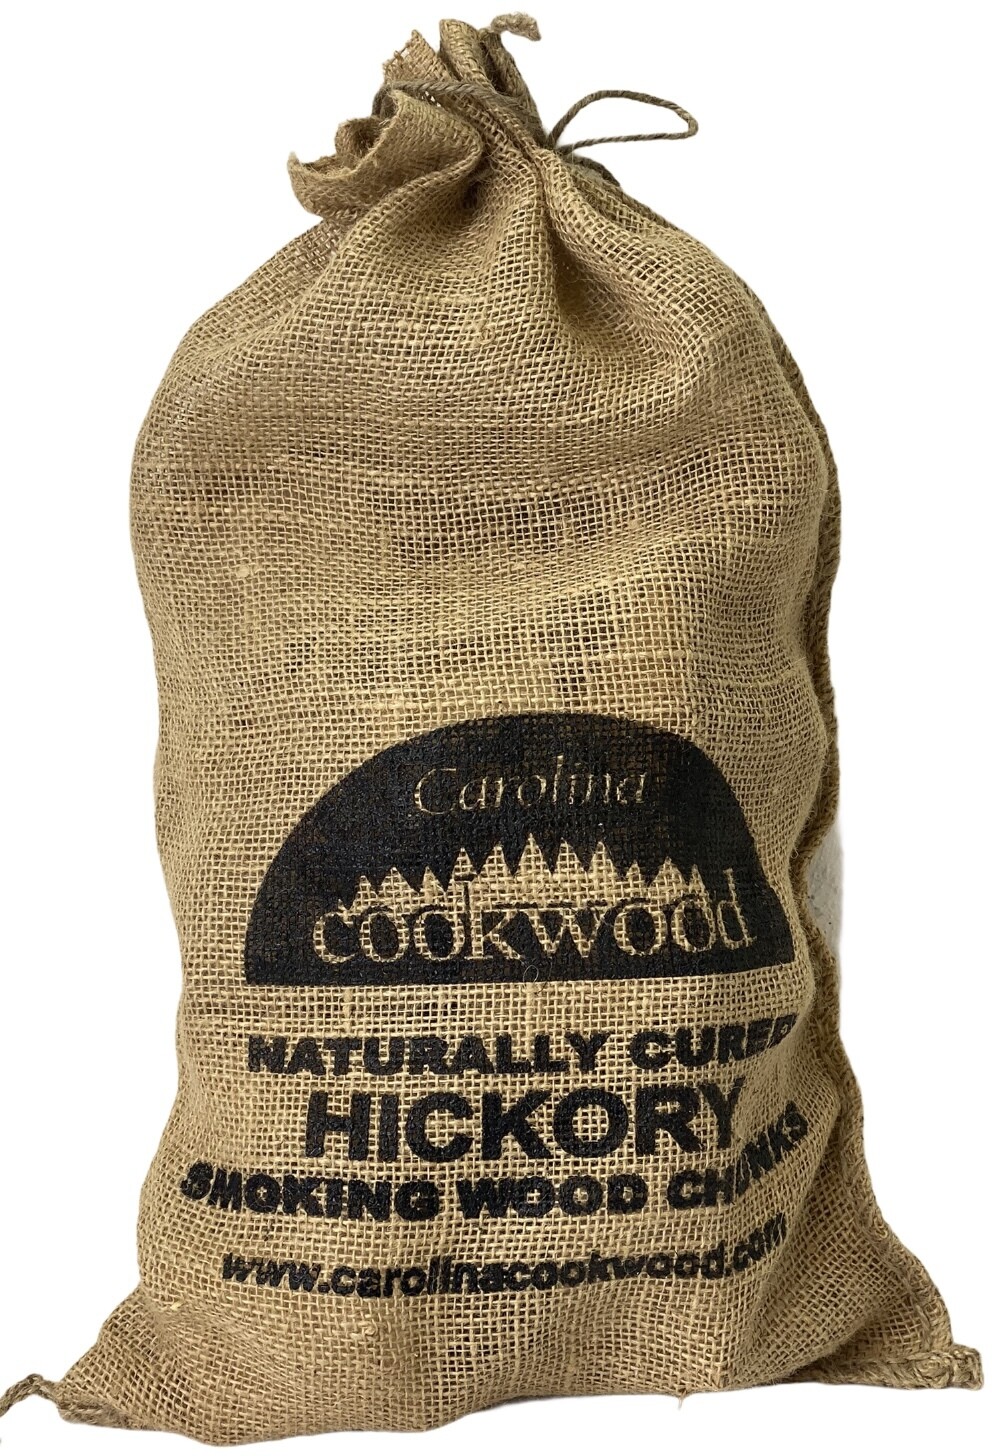 Carolina Cookwood Hickory Wood Smoking Chunks for BBQ Meat Brisket Ribs Chicken Turkey and More